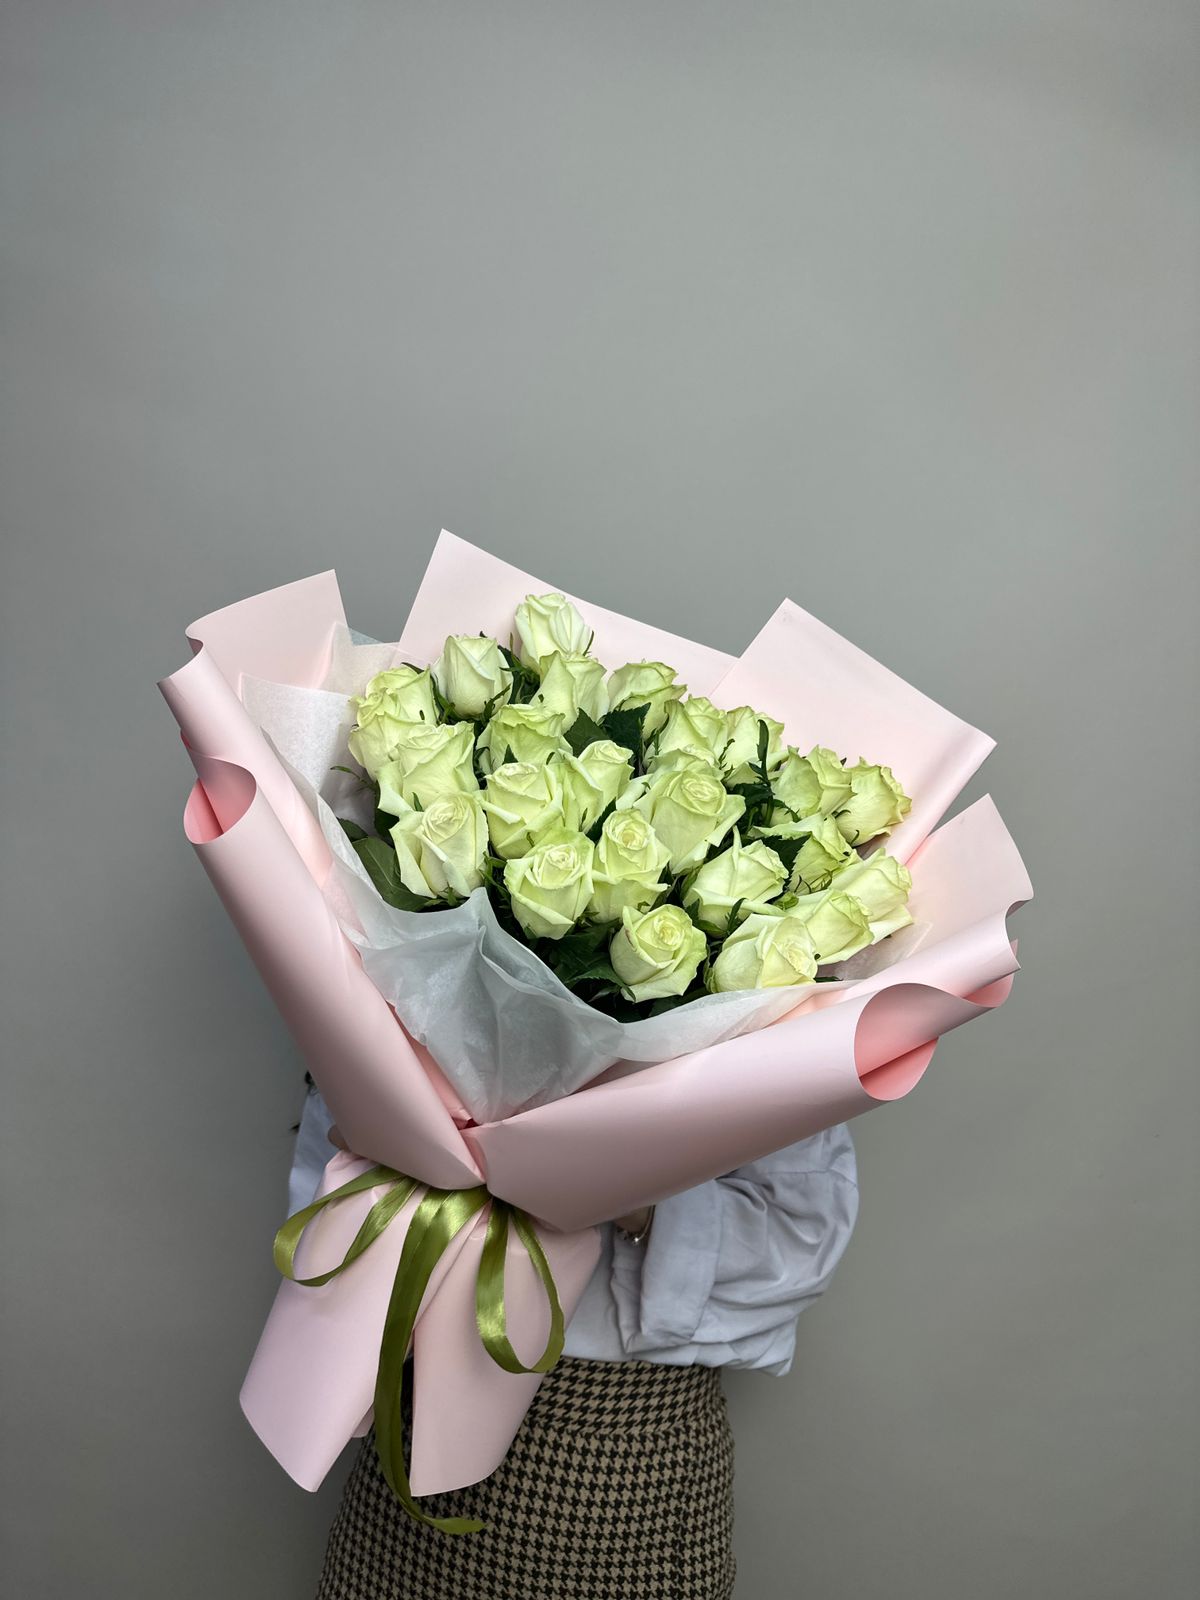 Bouquet of 25 times Grynta flowers delivered to Astana